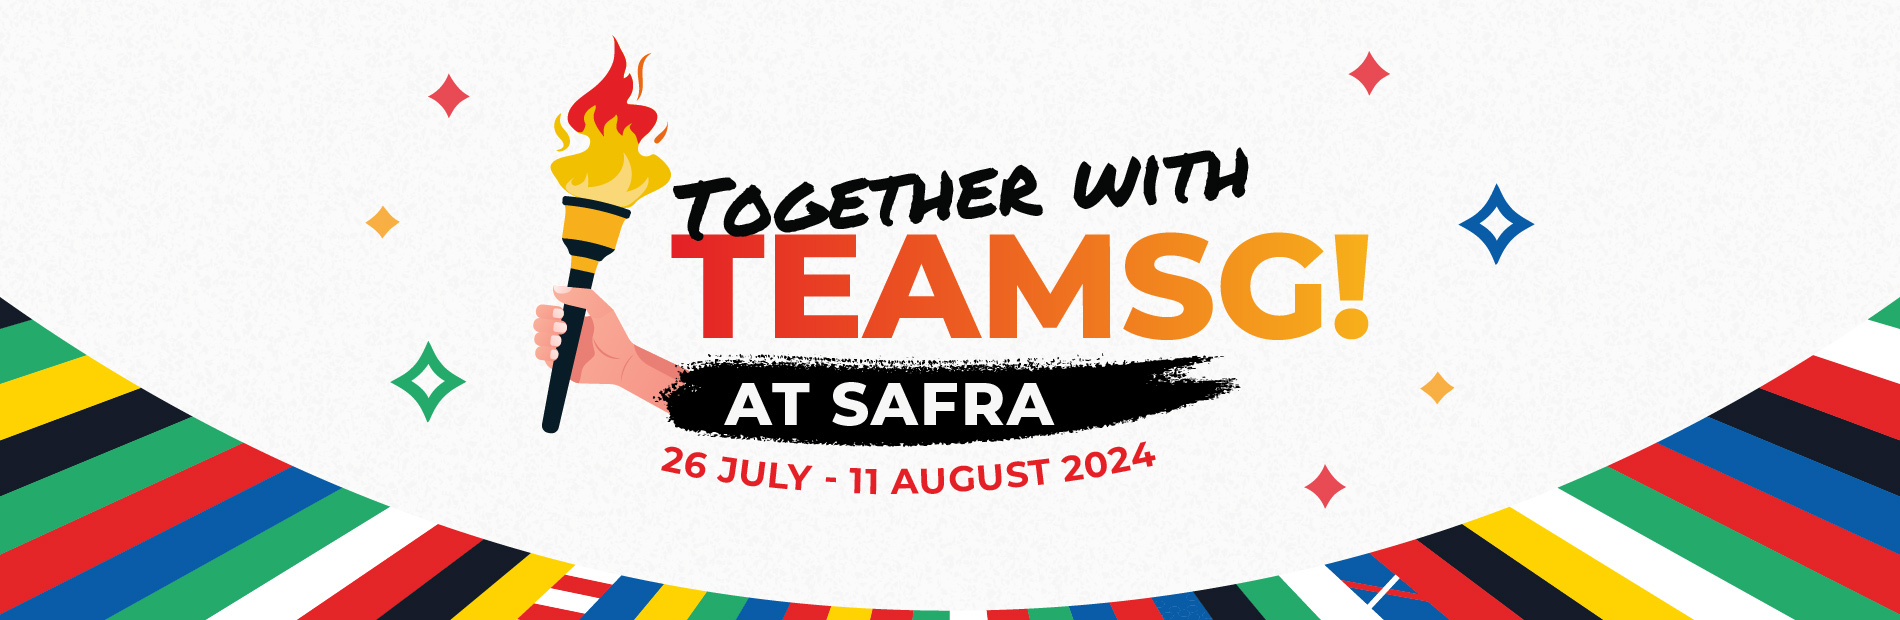 Olympic-Together-with-TeamSG-at-SAFRA-WhatsOn-Banner